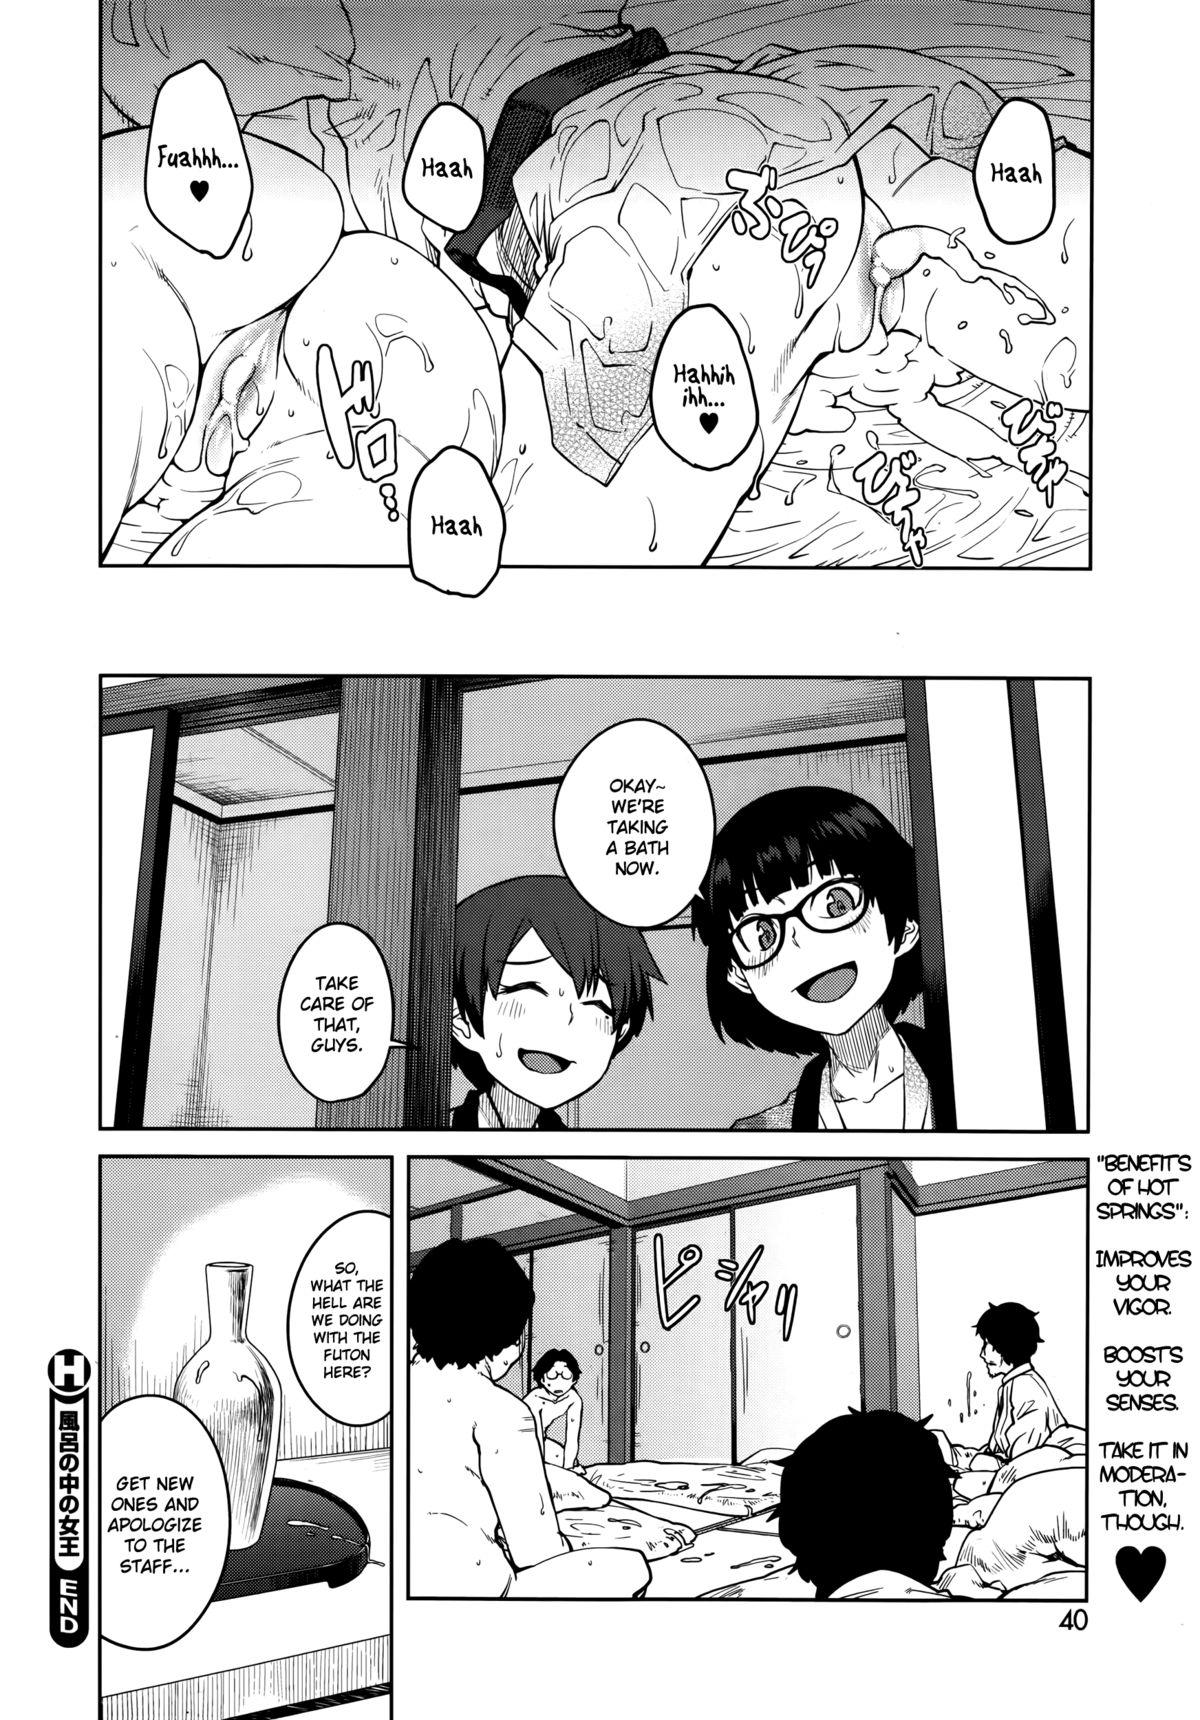 Hardcore "Joou" Series | "Queen" Series Ch. 1-2 Smooth - Page 43